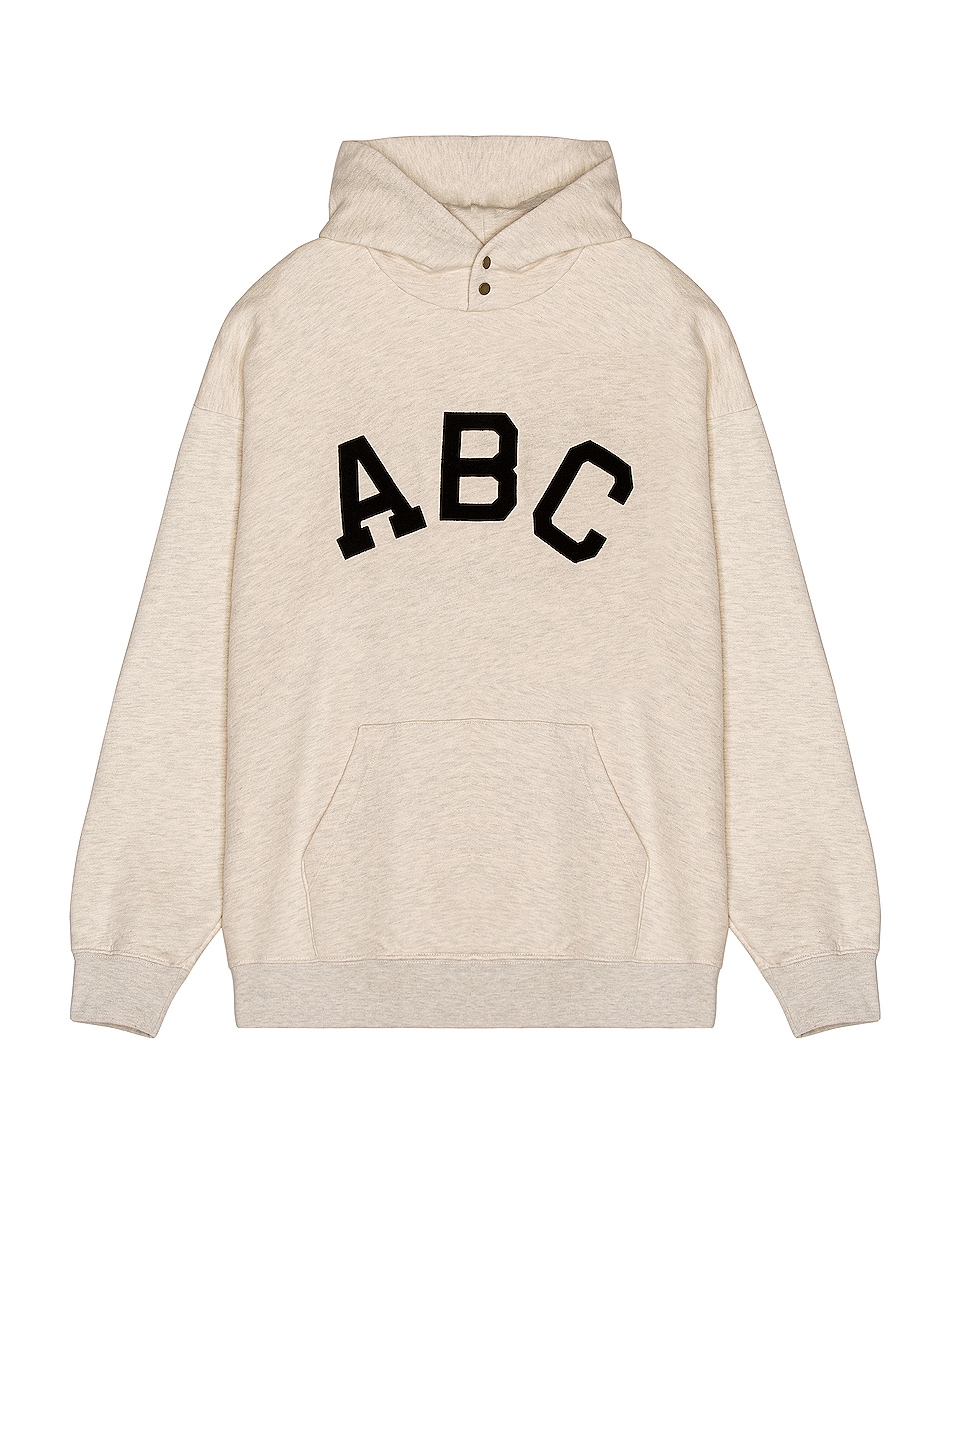 Image 1 of Fear of God ABC Hoodie in Cream Heather